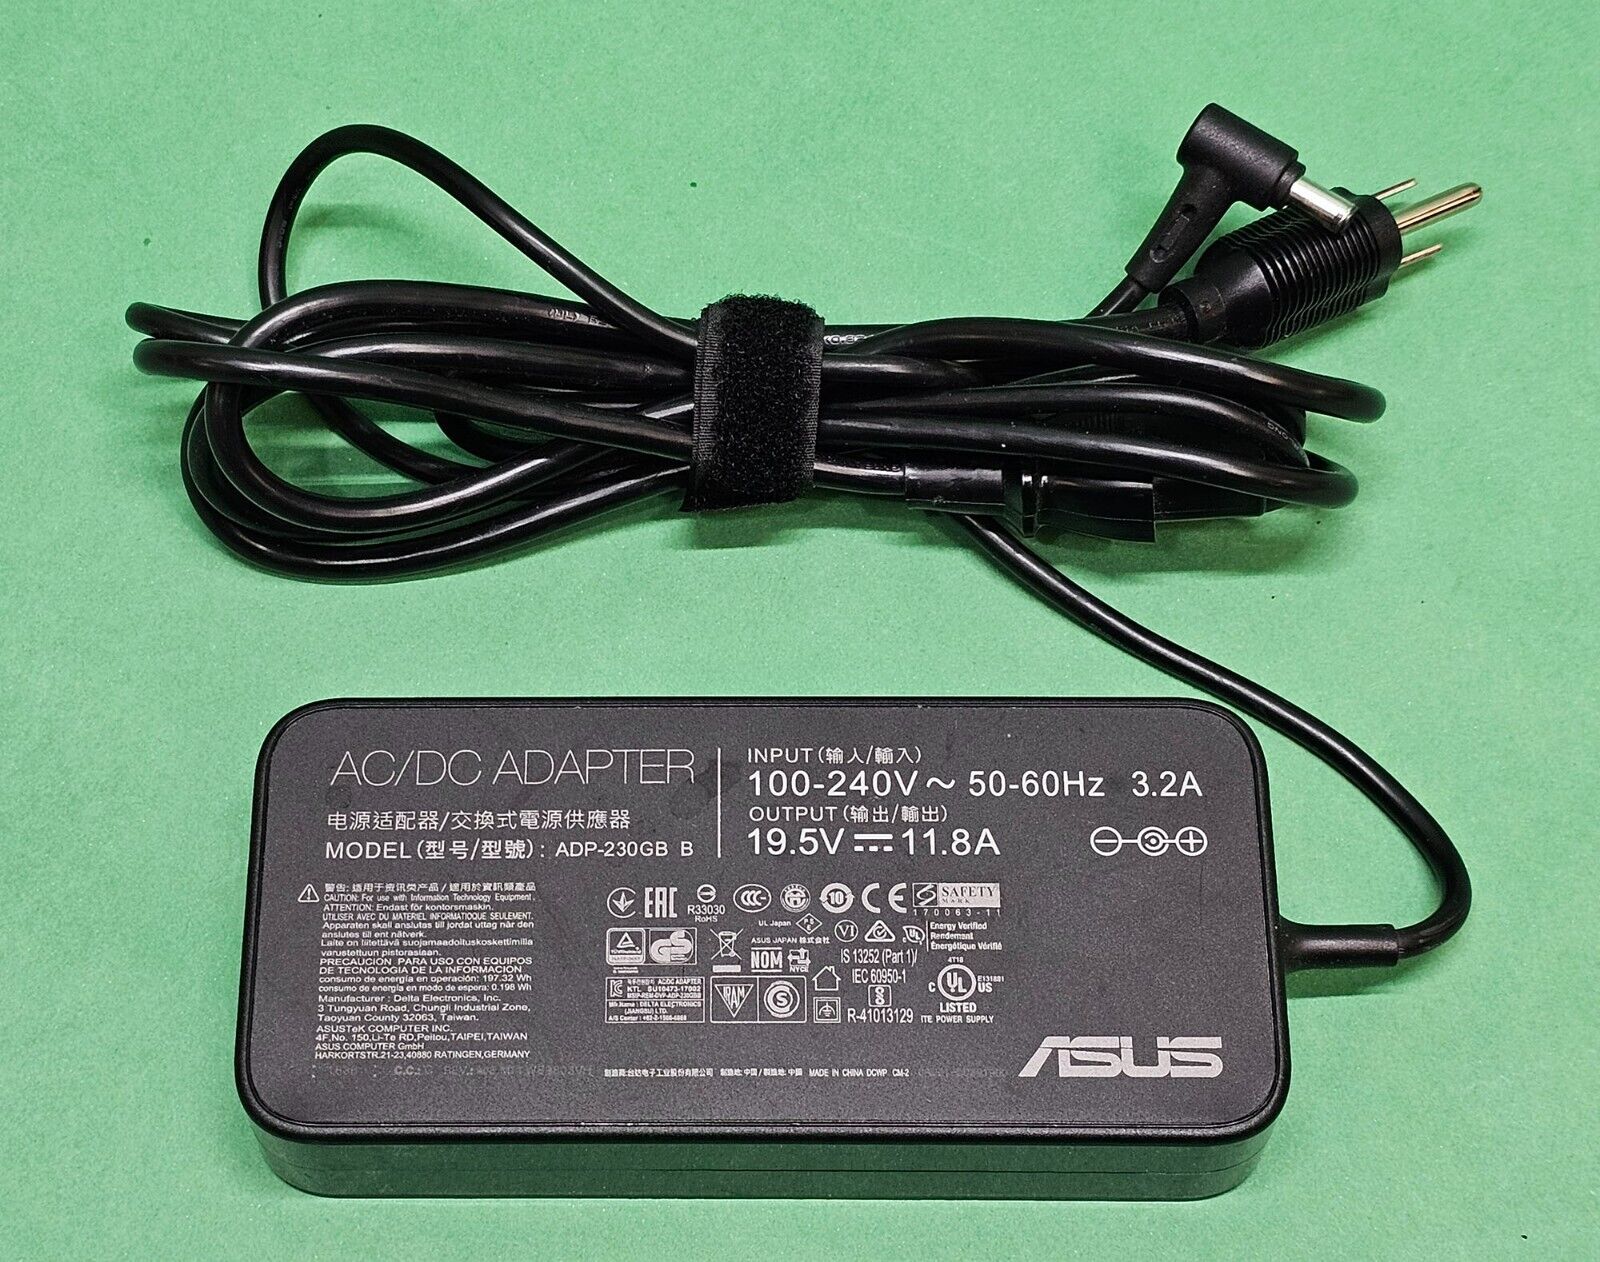 Genuine ASUS Laptop Power Adapter Charger ADP-230GB B 19.5V 11.8A 230W